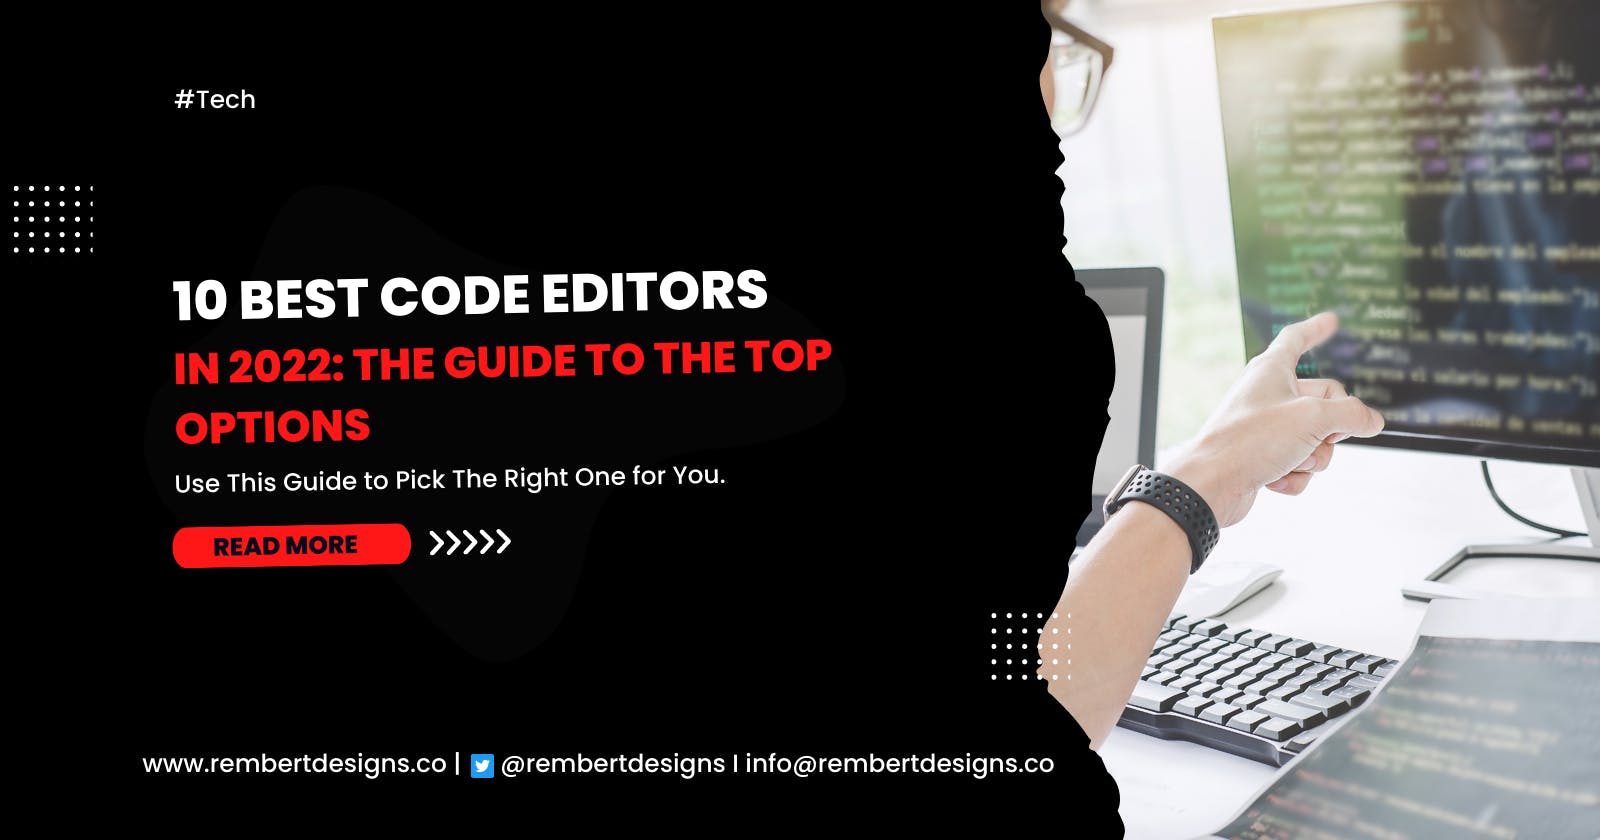 10 Best Code Editors in 2022: The Guide to the Top Options